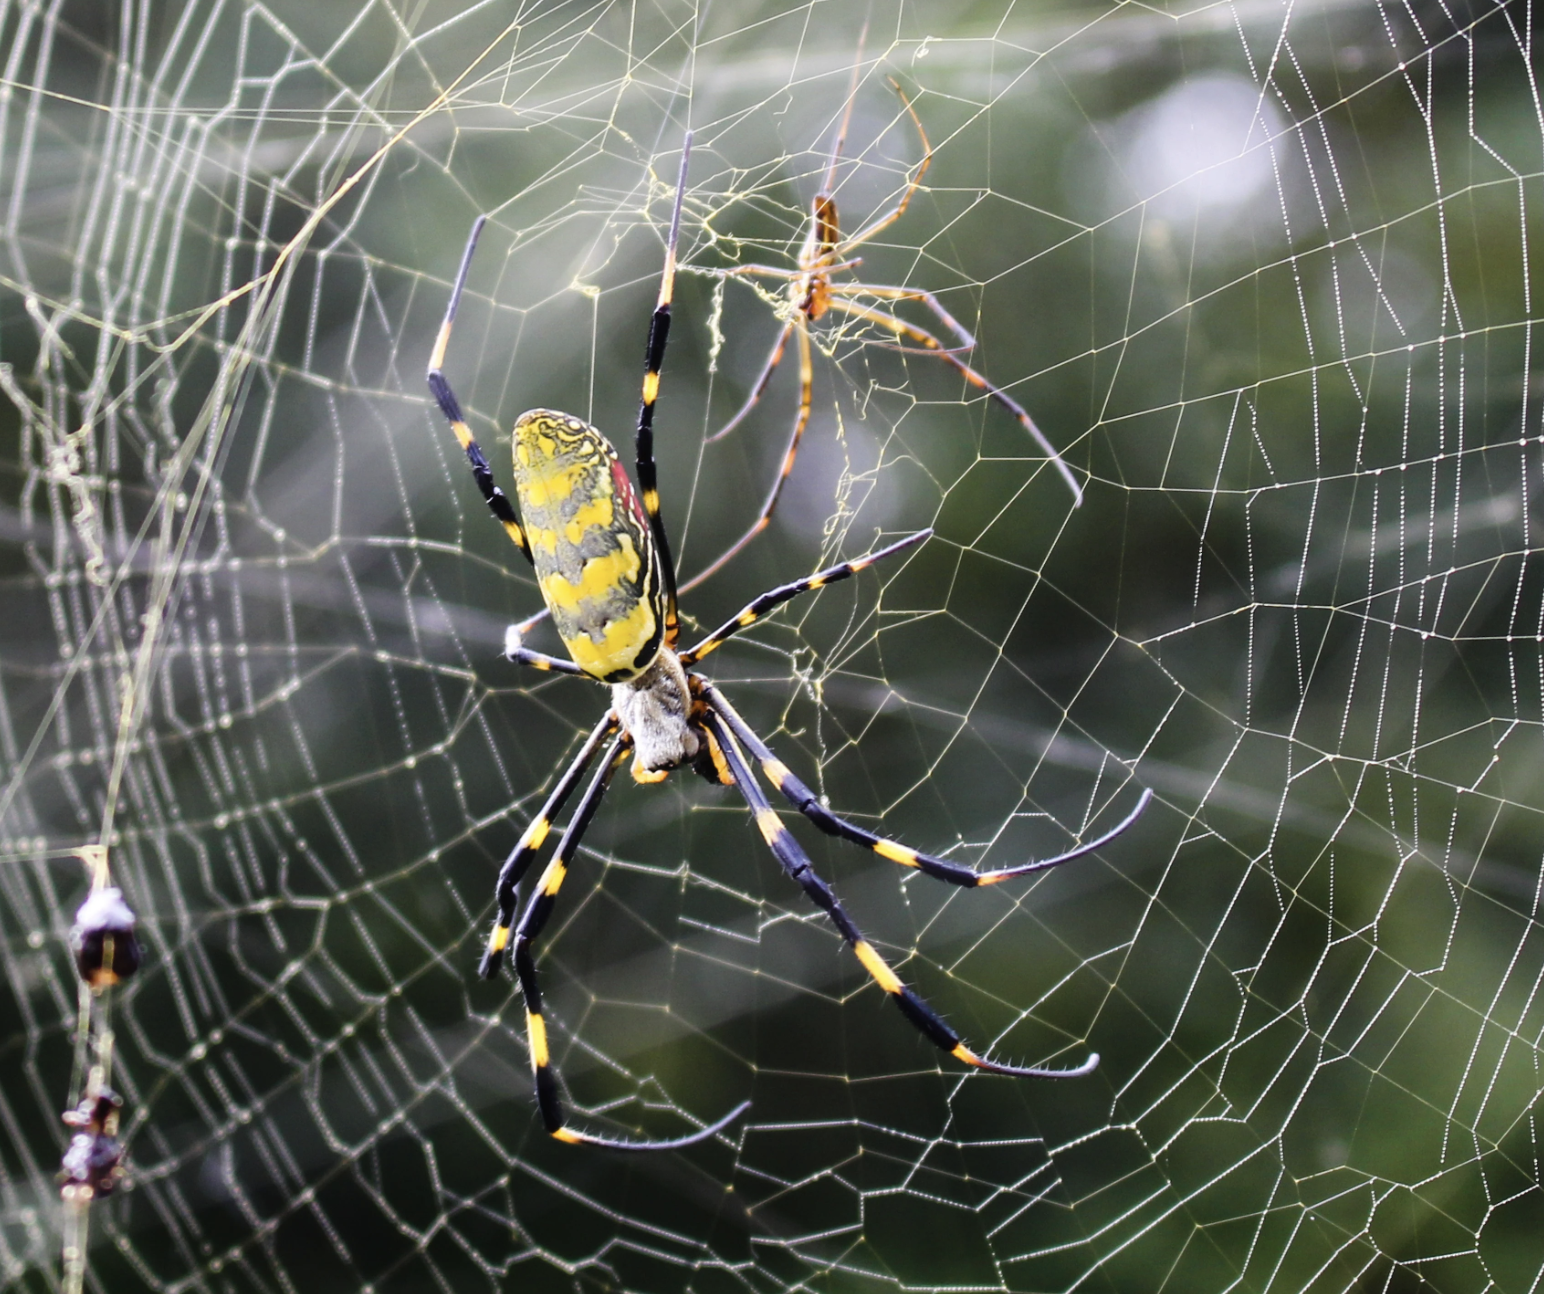 The East Asian Joro spider, officially known as Trichonephila clavata, likely arrived in the U.S. on a shipping container around 2013. The species is native to Japan, Korea, Taiwan, and China.